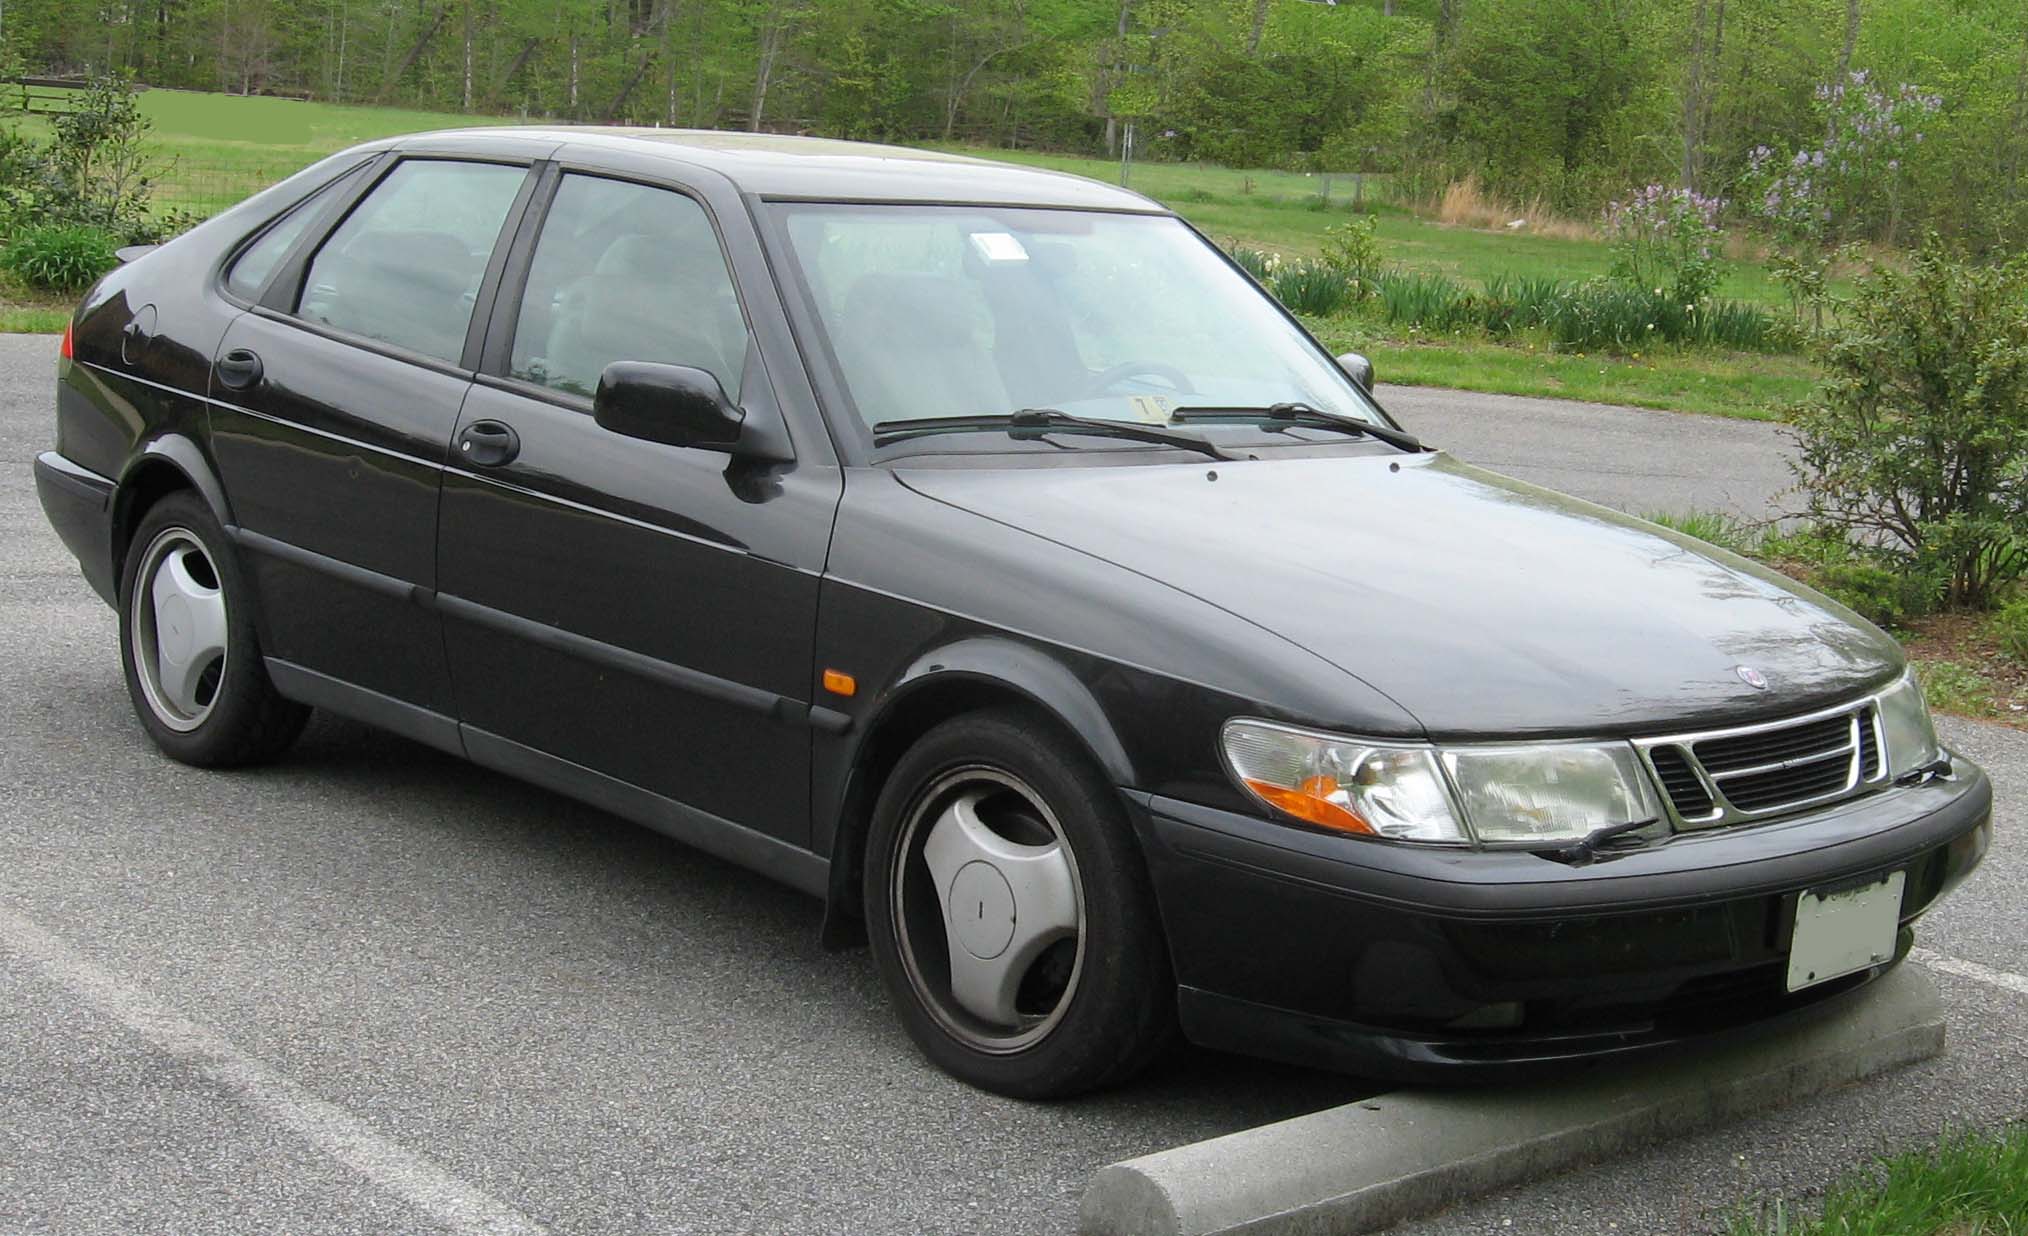 Saab 9000i CD Photo Gallery: Photo #06 out of 11, Image Size - 241 ...